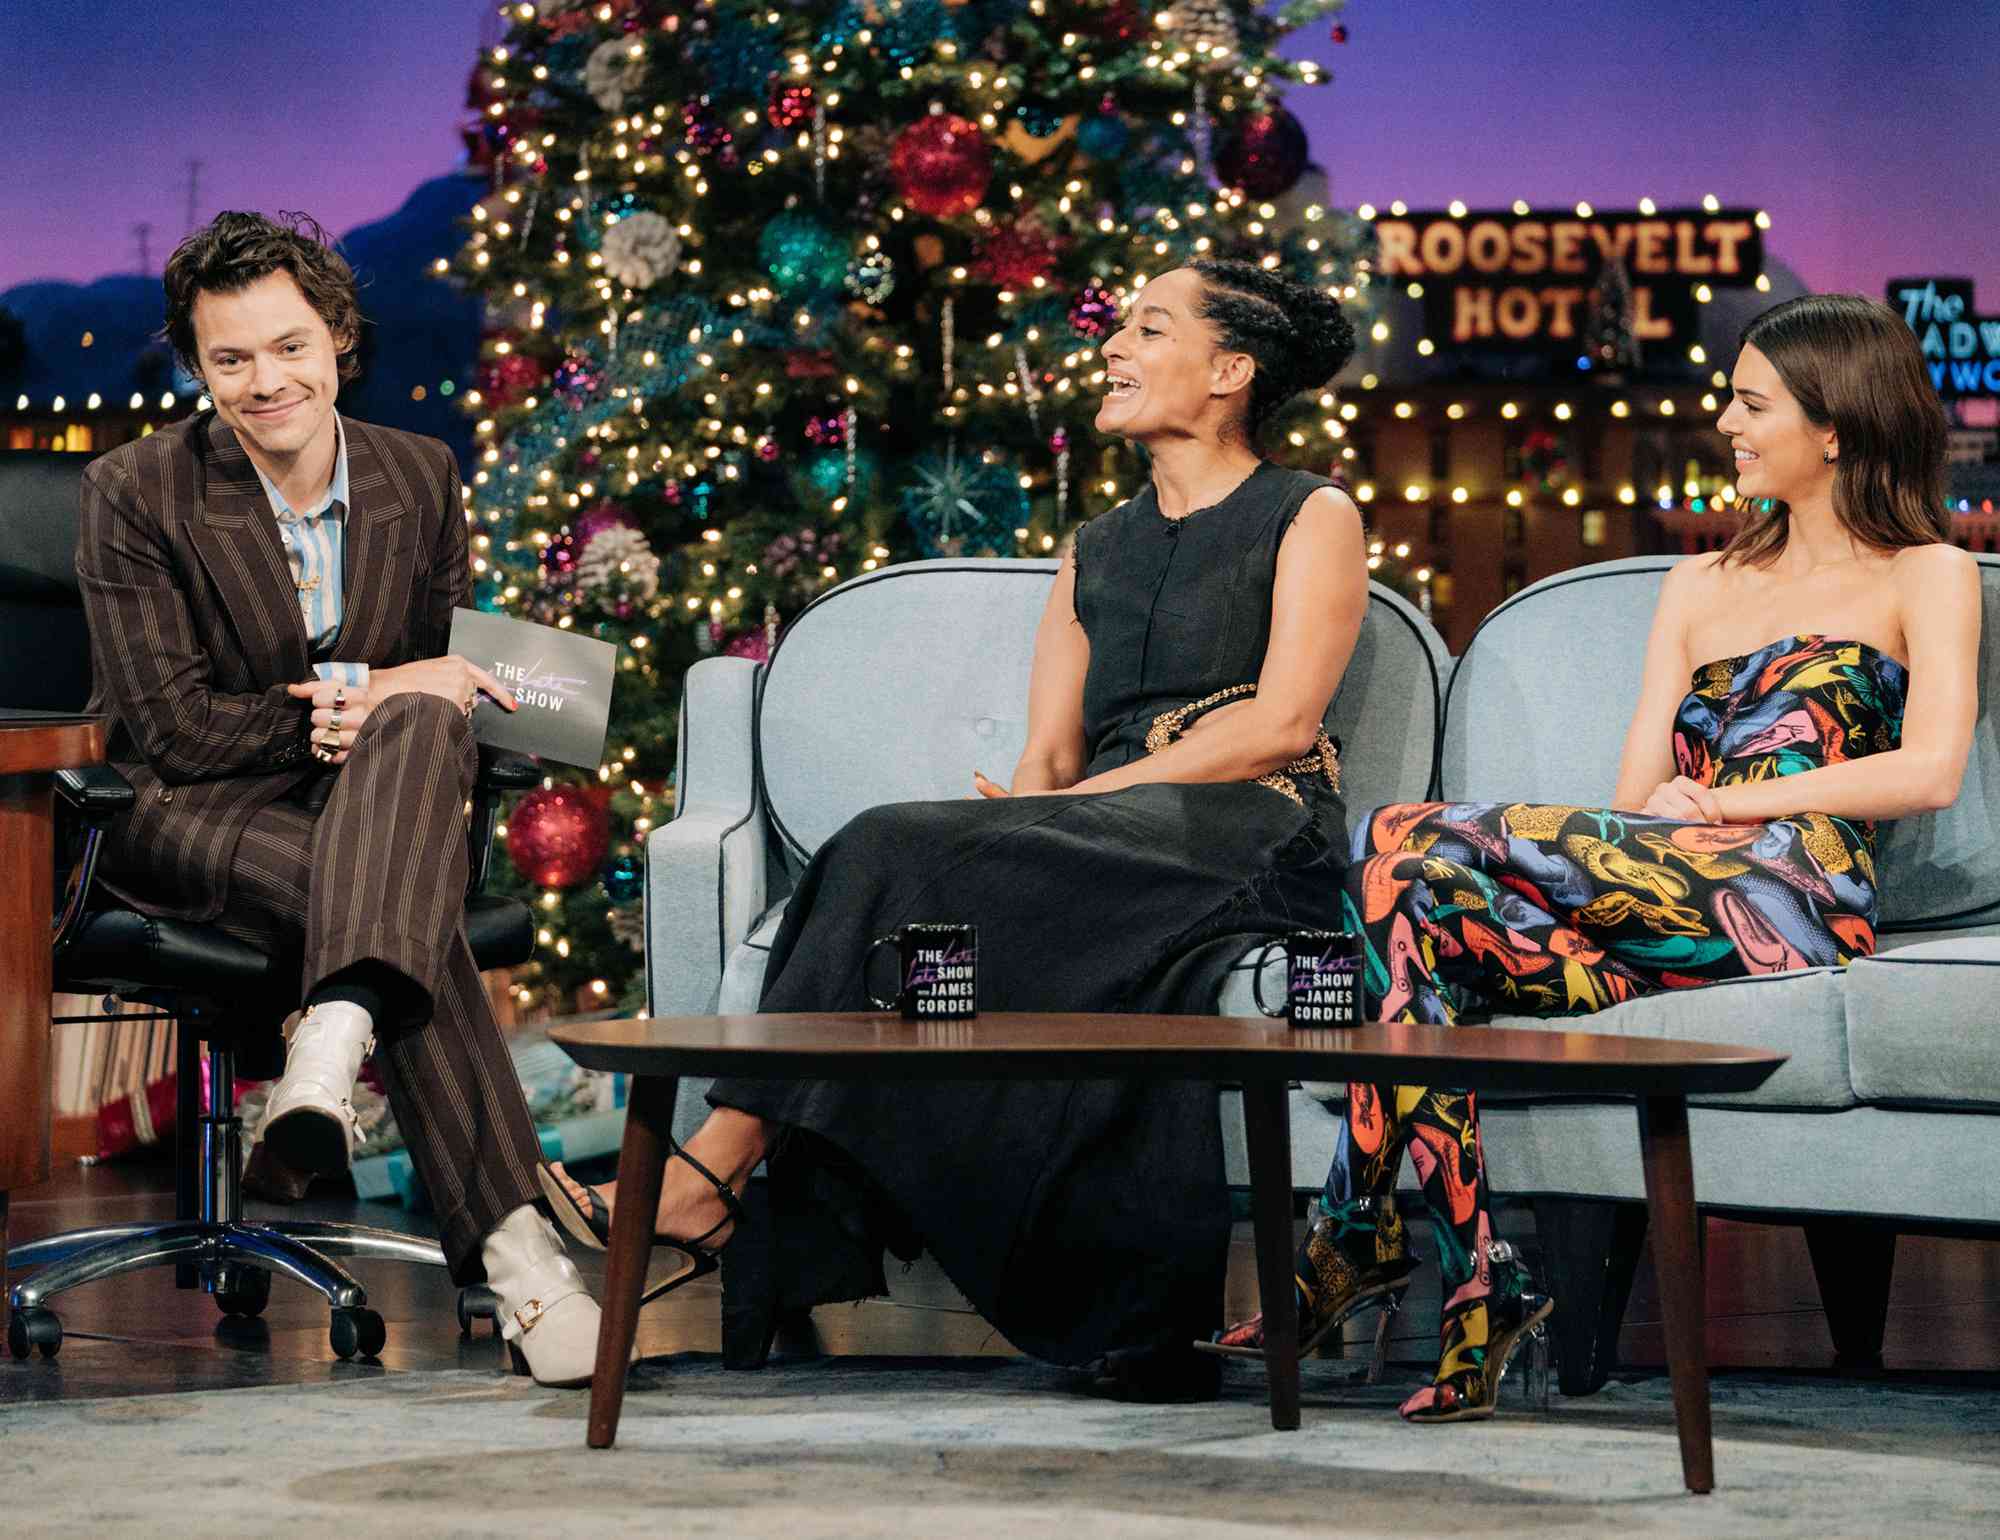 Harry Styles guest-hosts The Late Late Show with James Corden airing Tuesday, December 10, 2019, with guests Tracee Ellis Ross and Kendall Jenner